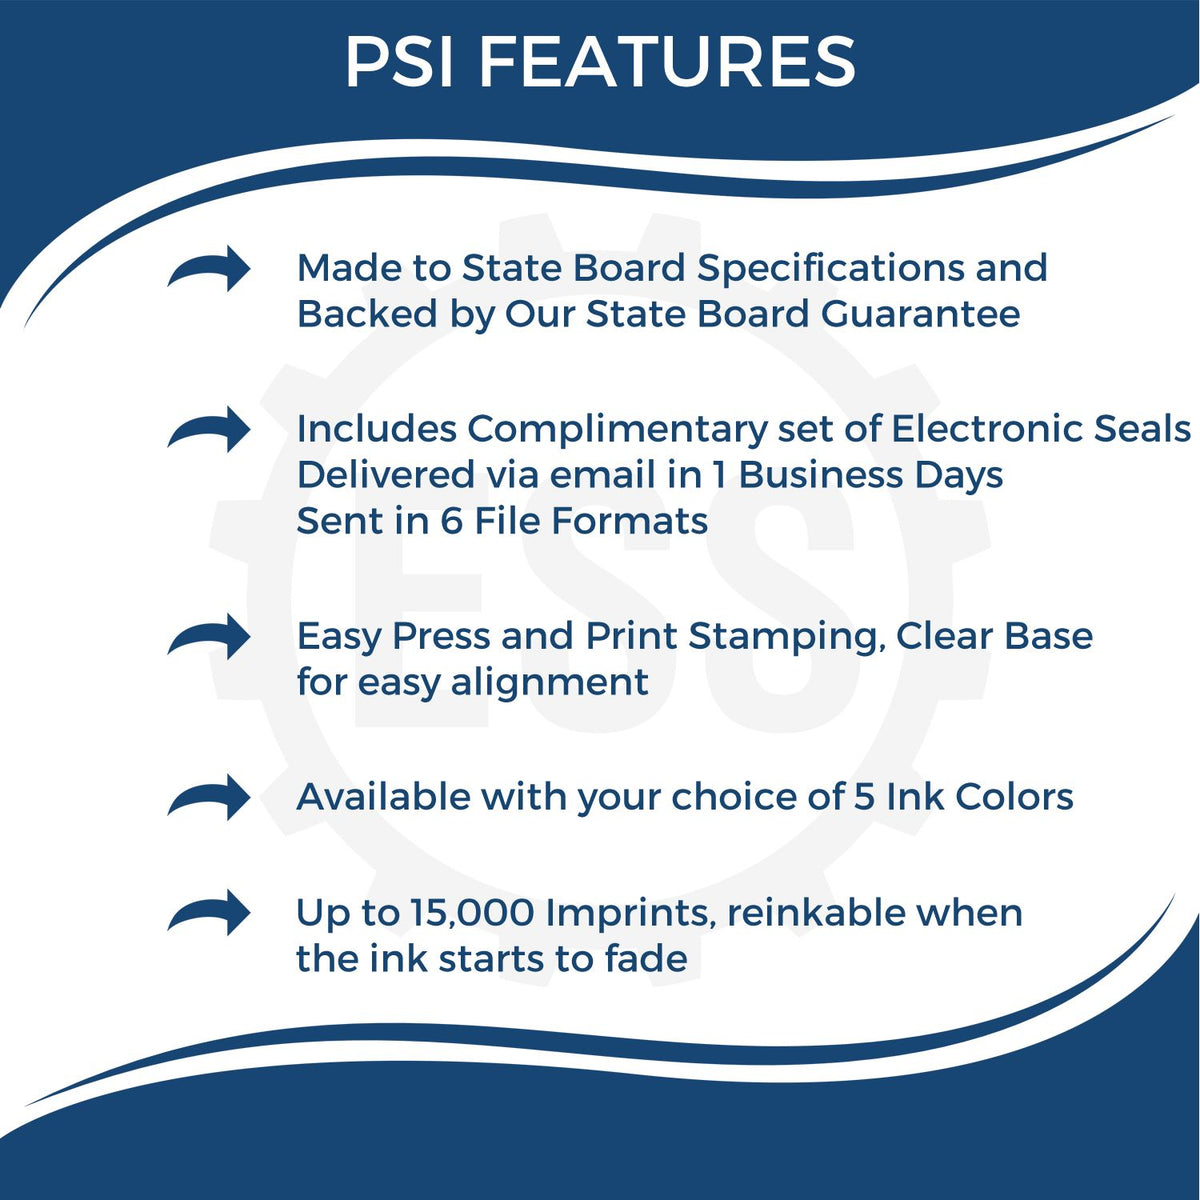 A picture of an infographic highlighting the selling points for the PSI Washington Notary Stamp